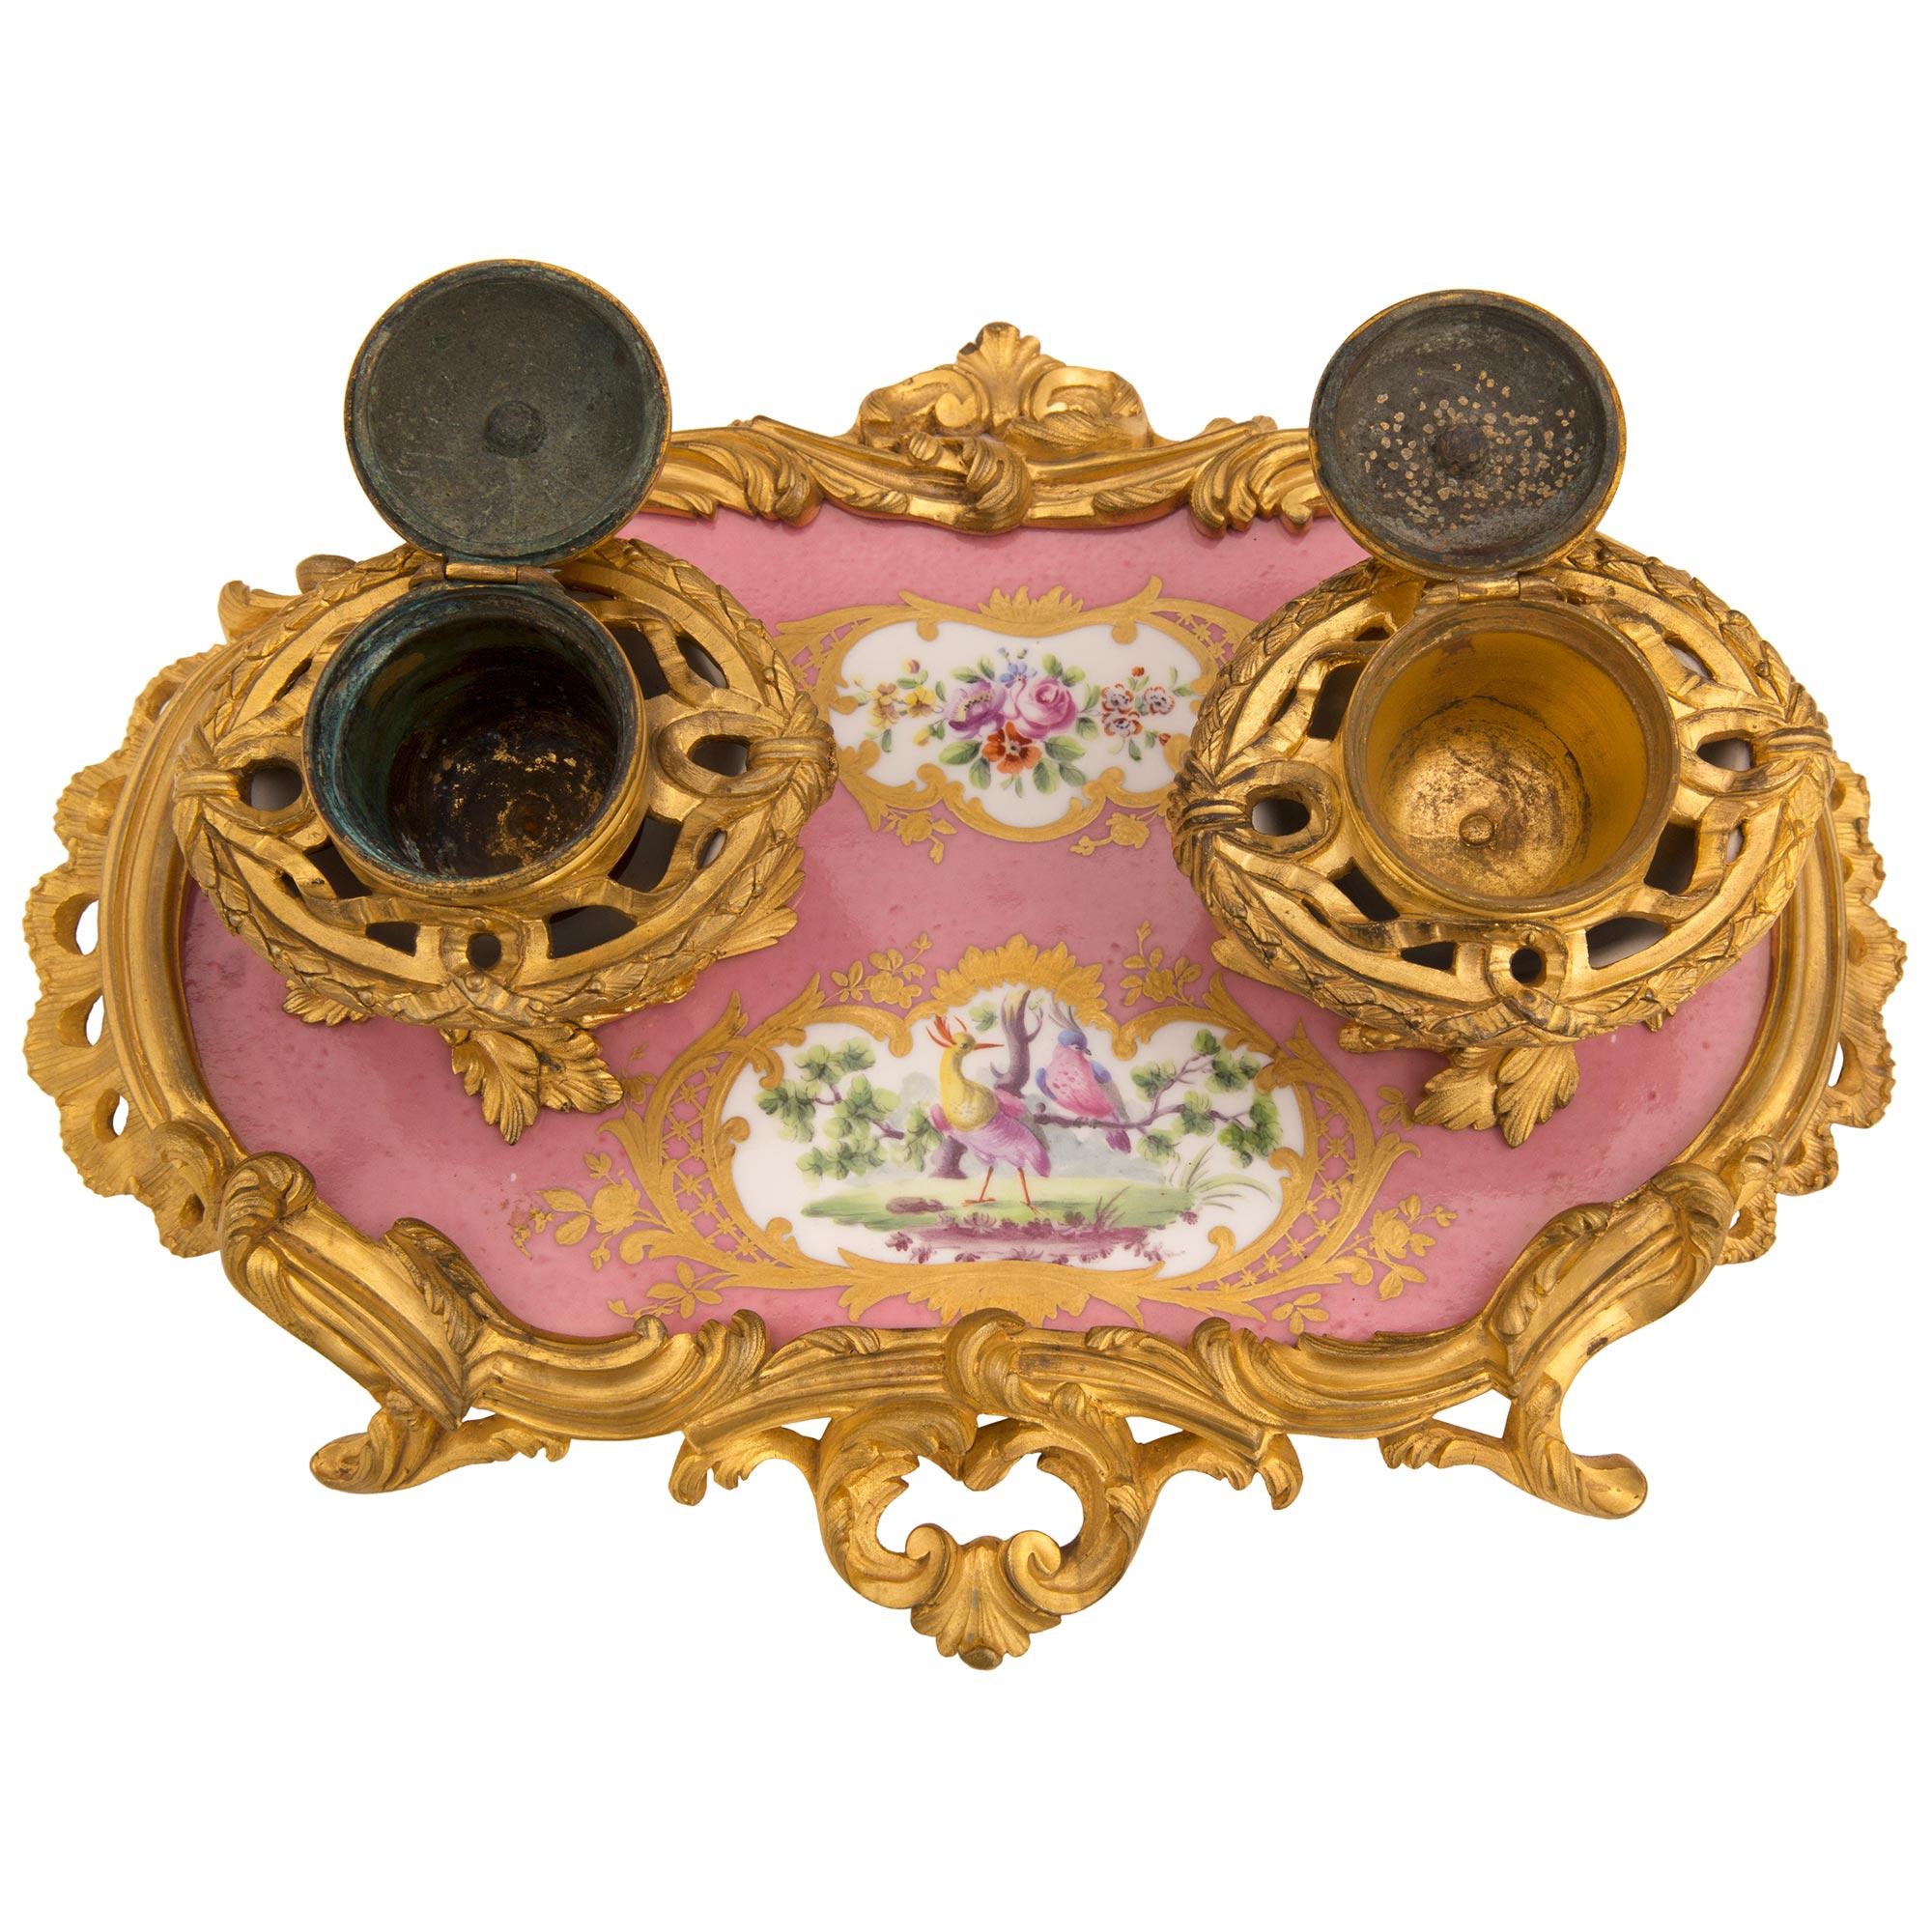 A beautiful and exceptionally high quality French early 19th century Louis XV st. Sèvres Porcelain and ormolu inkwell, signed Sèvres. The inkwell is raised by striking pierced scrolled foliate ormolu movements in a most decorative satin and